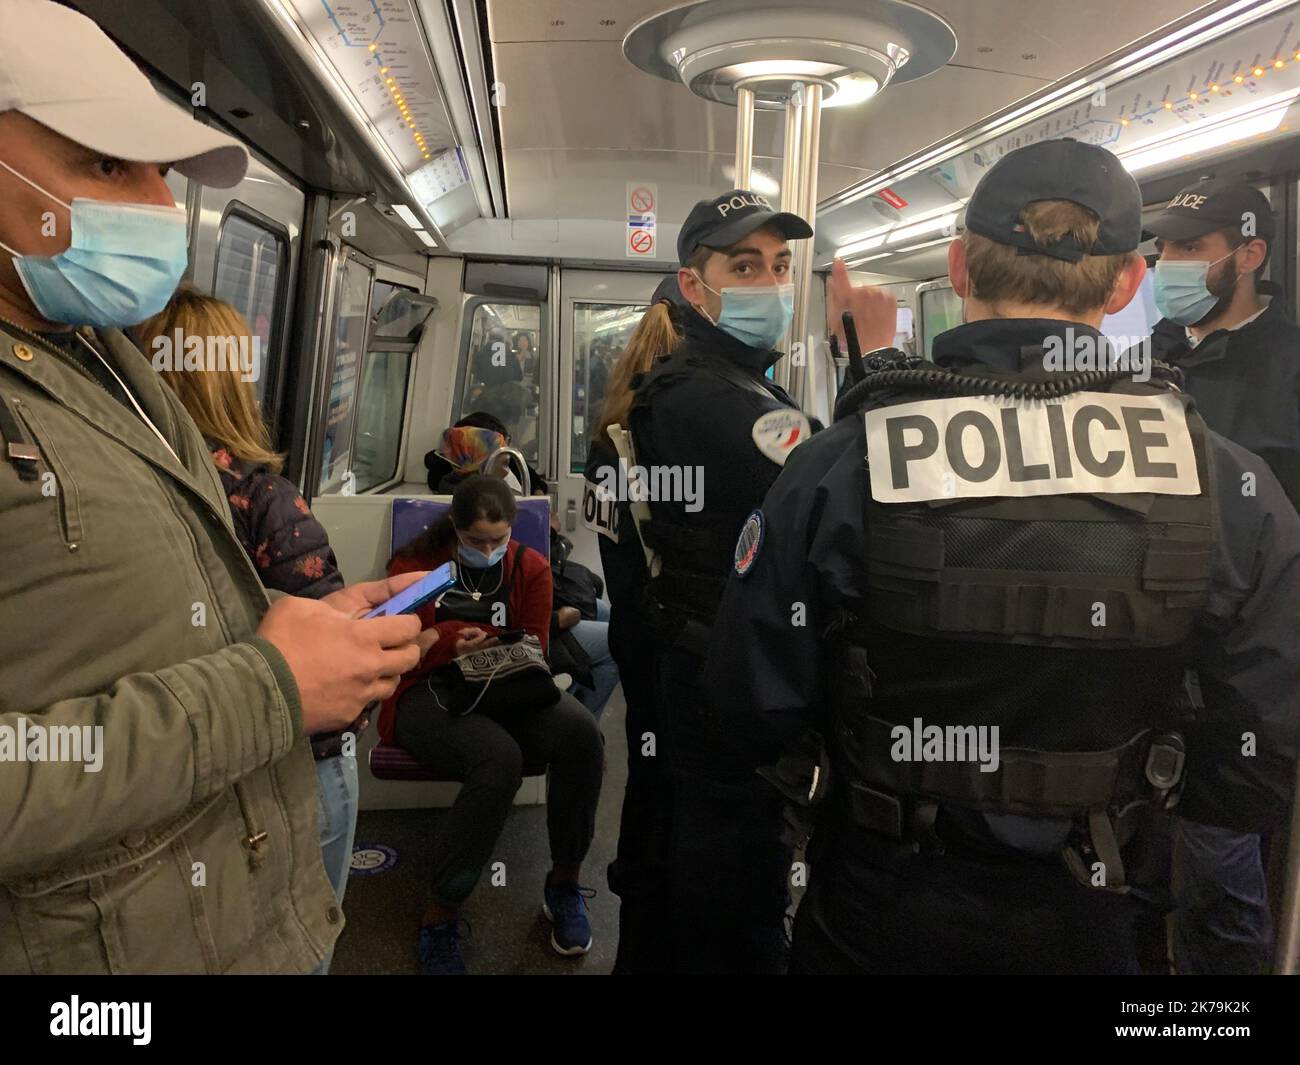 First Day Of Unlockdown In France. line 13 of the metro in Paris Stock Photo